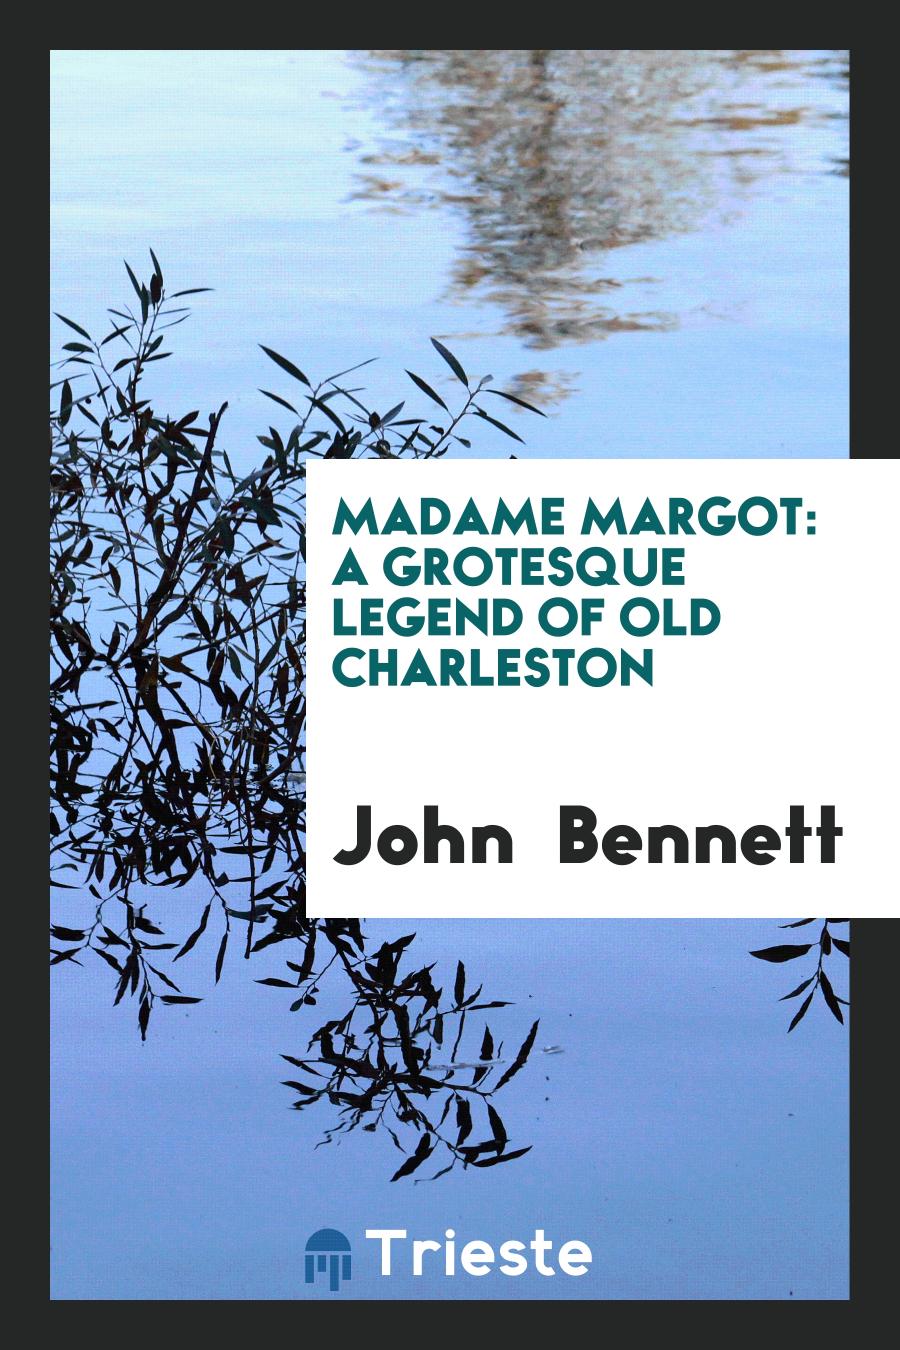 Madame Margot: A Grotesque Legend of Old Charleston